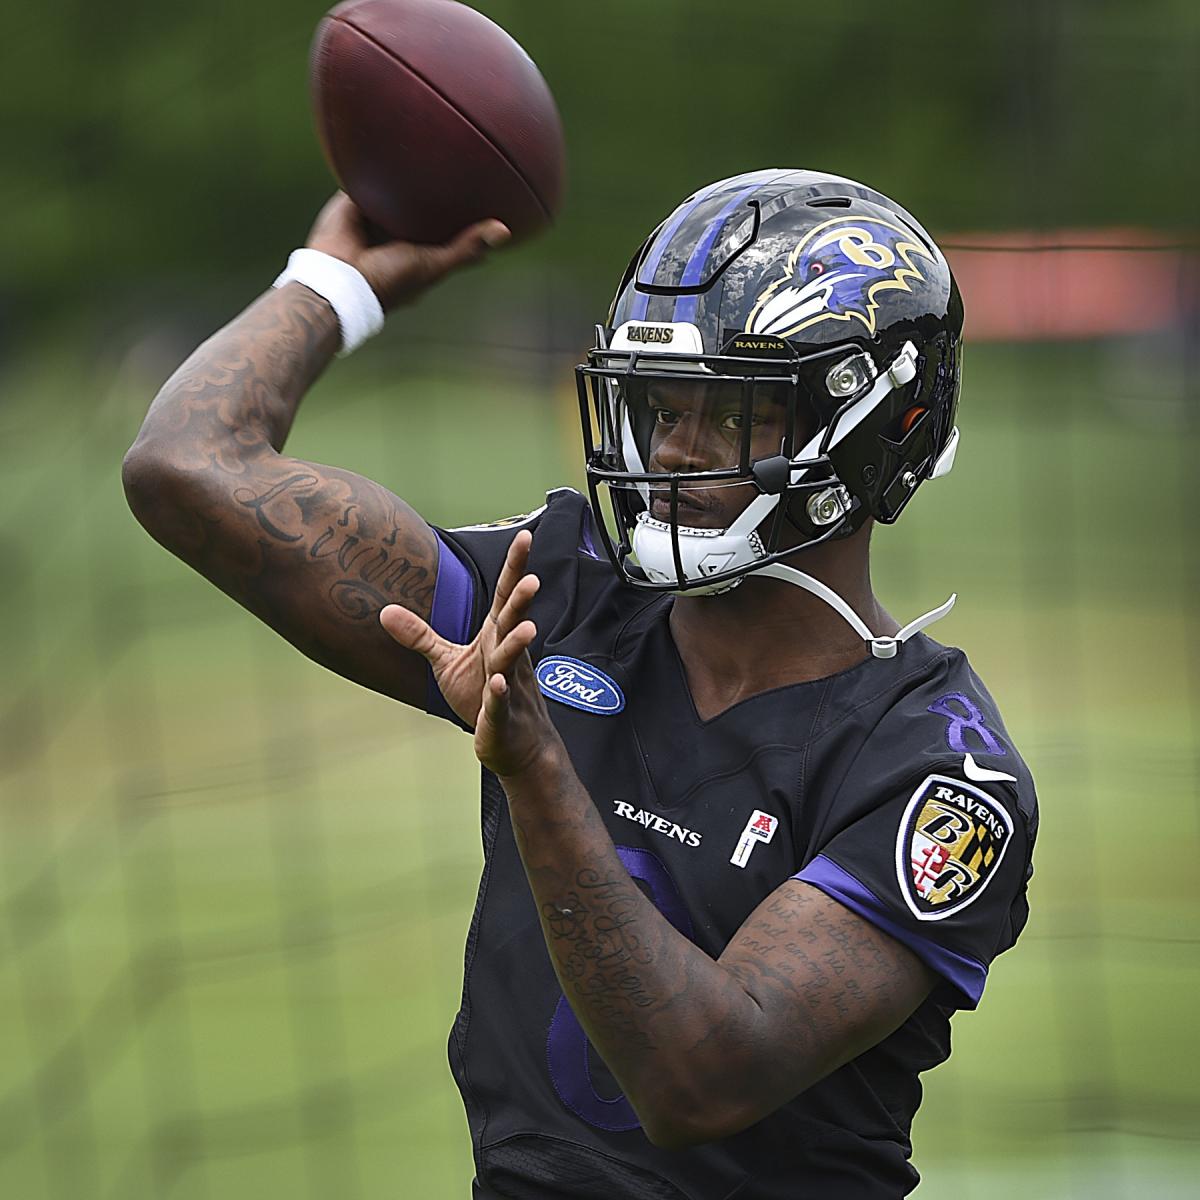 Could Lamar Jackson Have Mahomes-Like Breakout? Ravens Are Trying to Find out ...